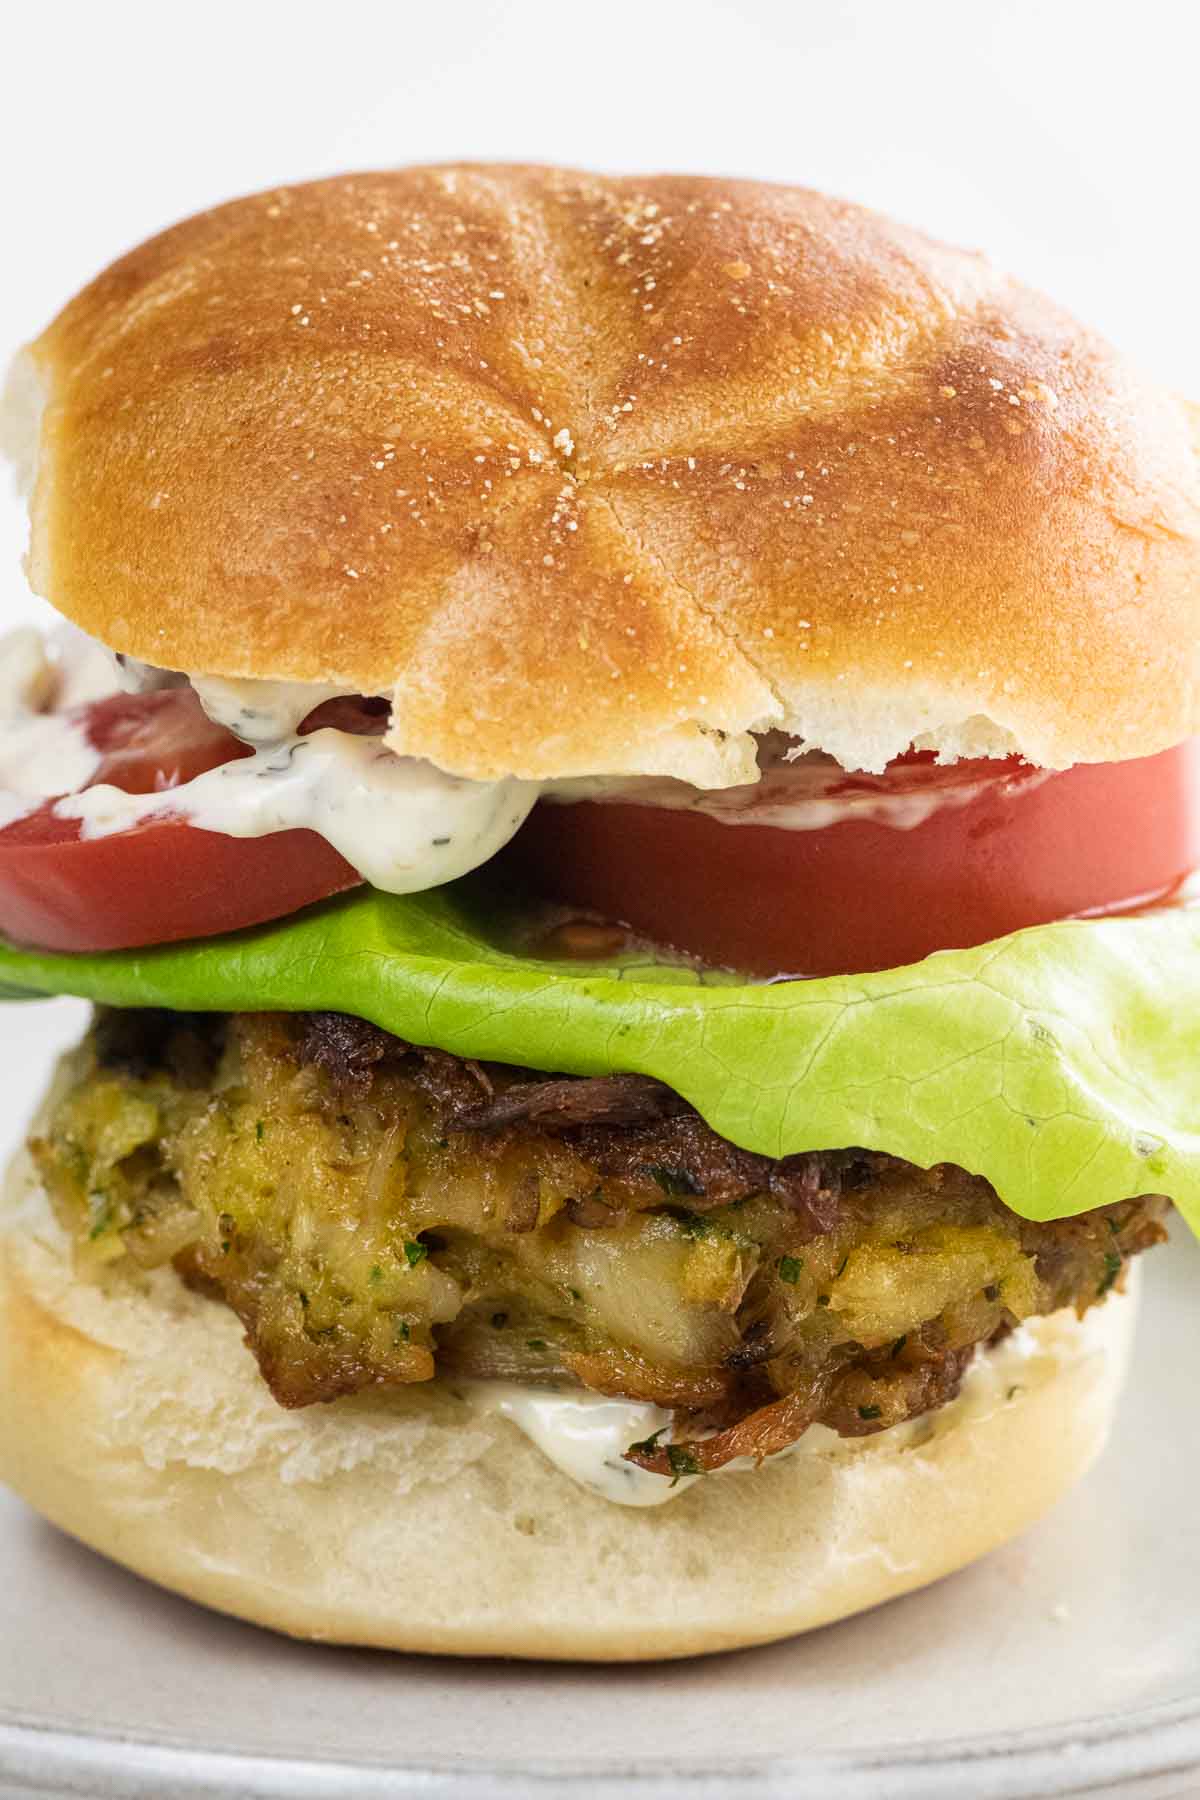 a crab cake sandwich on a kaiser roll with lettuce, tomato, and tartar sauce